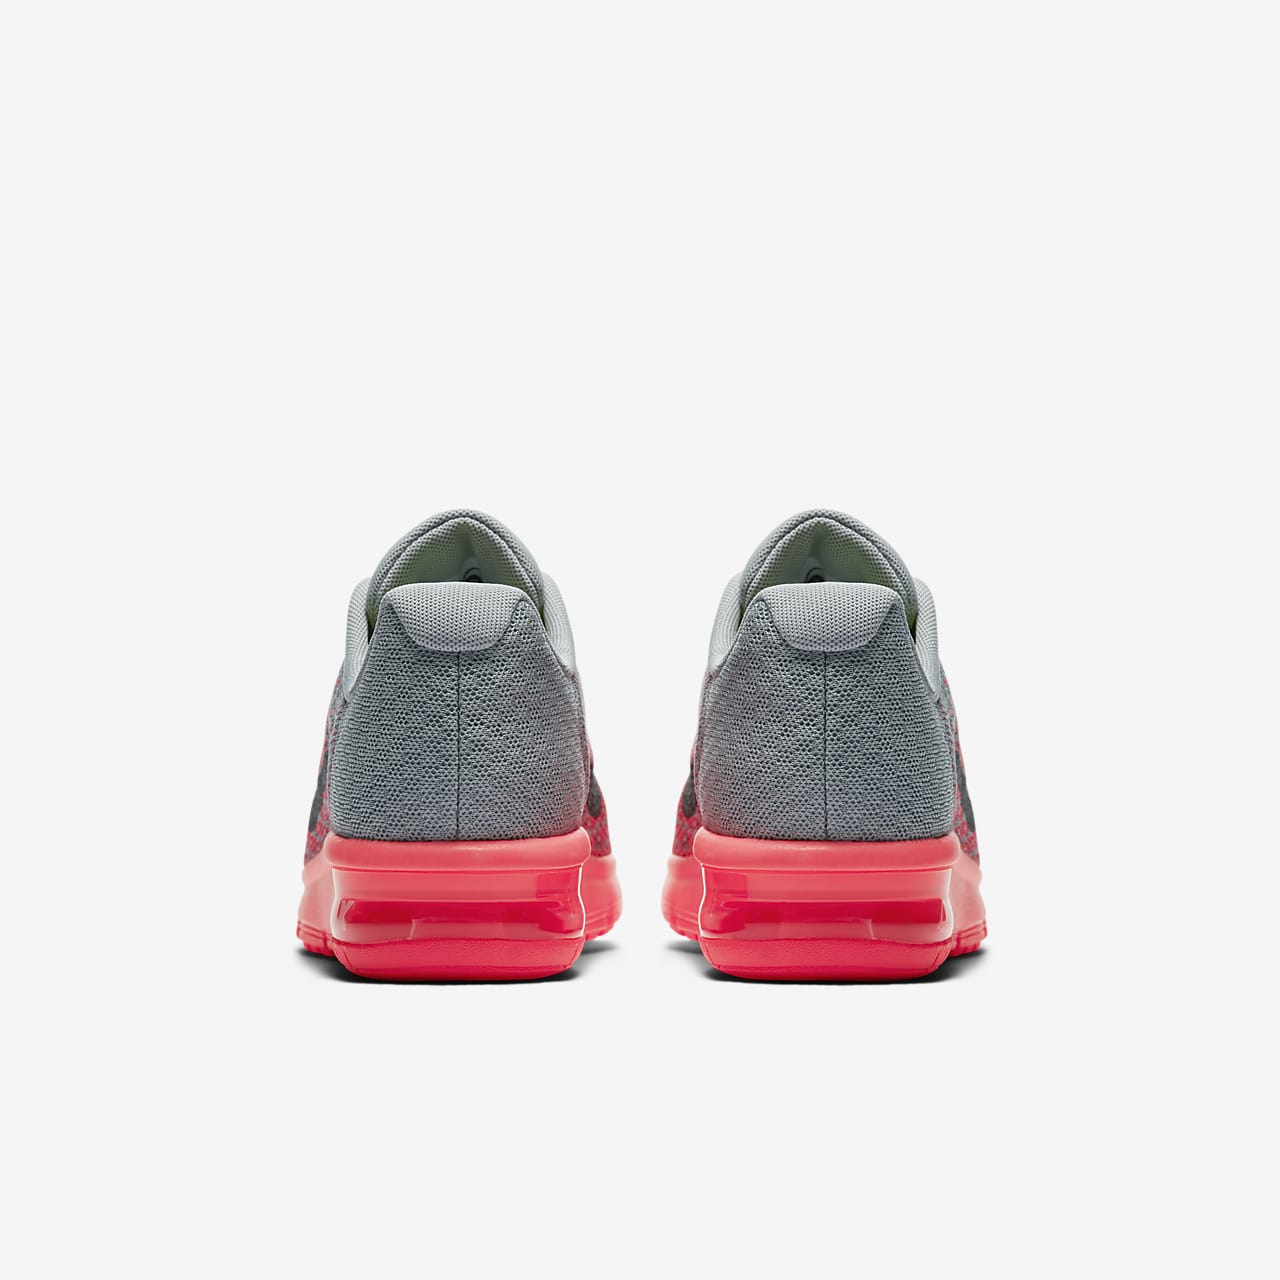 nike air max sequent 2 price